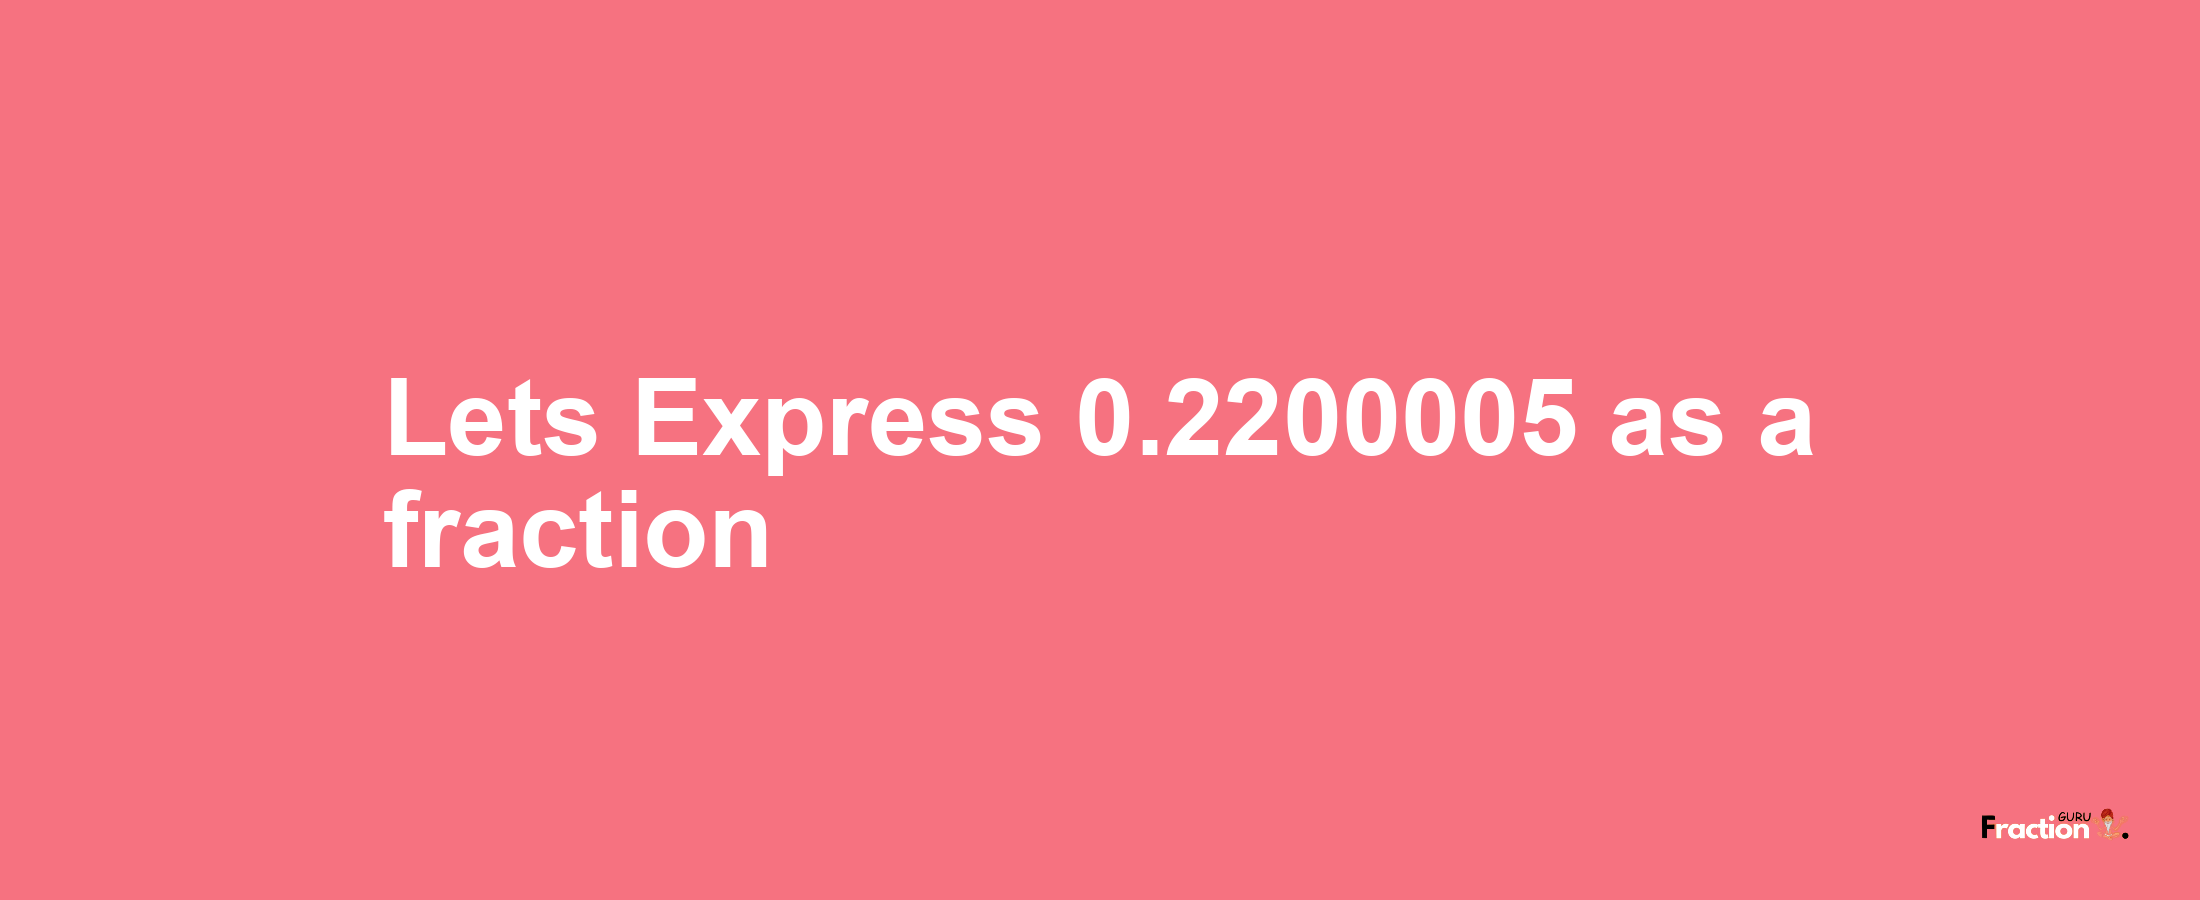 Lets Express 0.2200005 as afraction